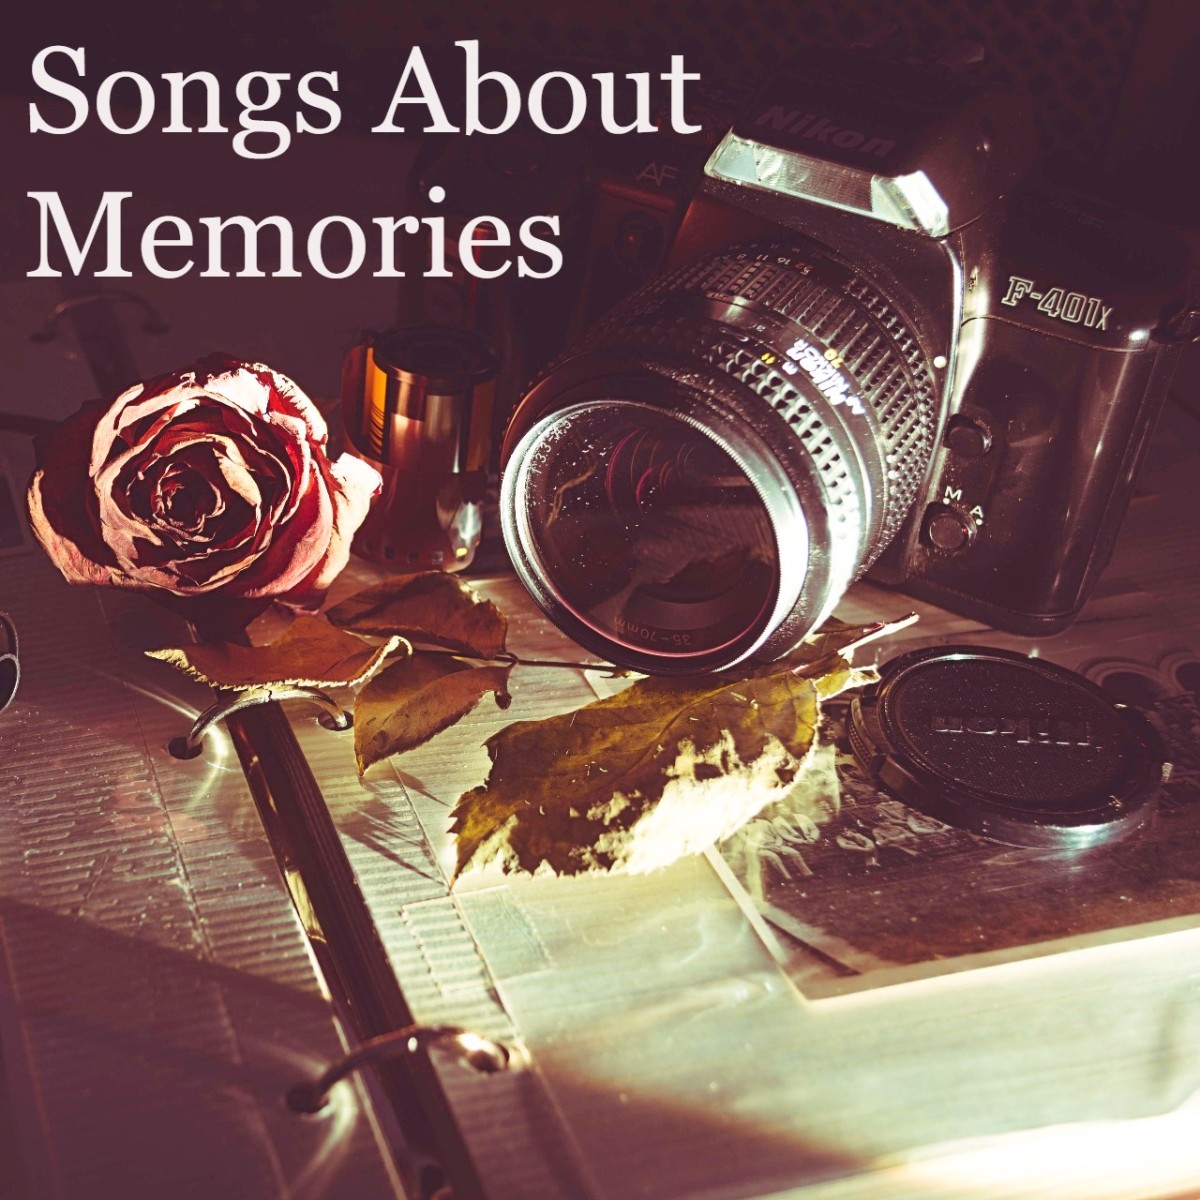 Remember the way it used to be? Bring back memories about the good times spent with friends, family, and old flames. Make a playlist of pop, rock, and country songs about memories and reminiscing.  